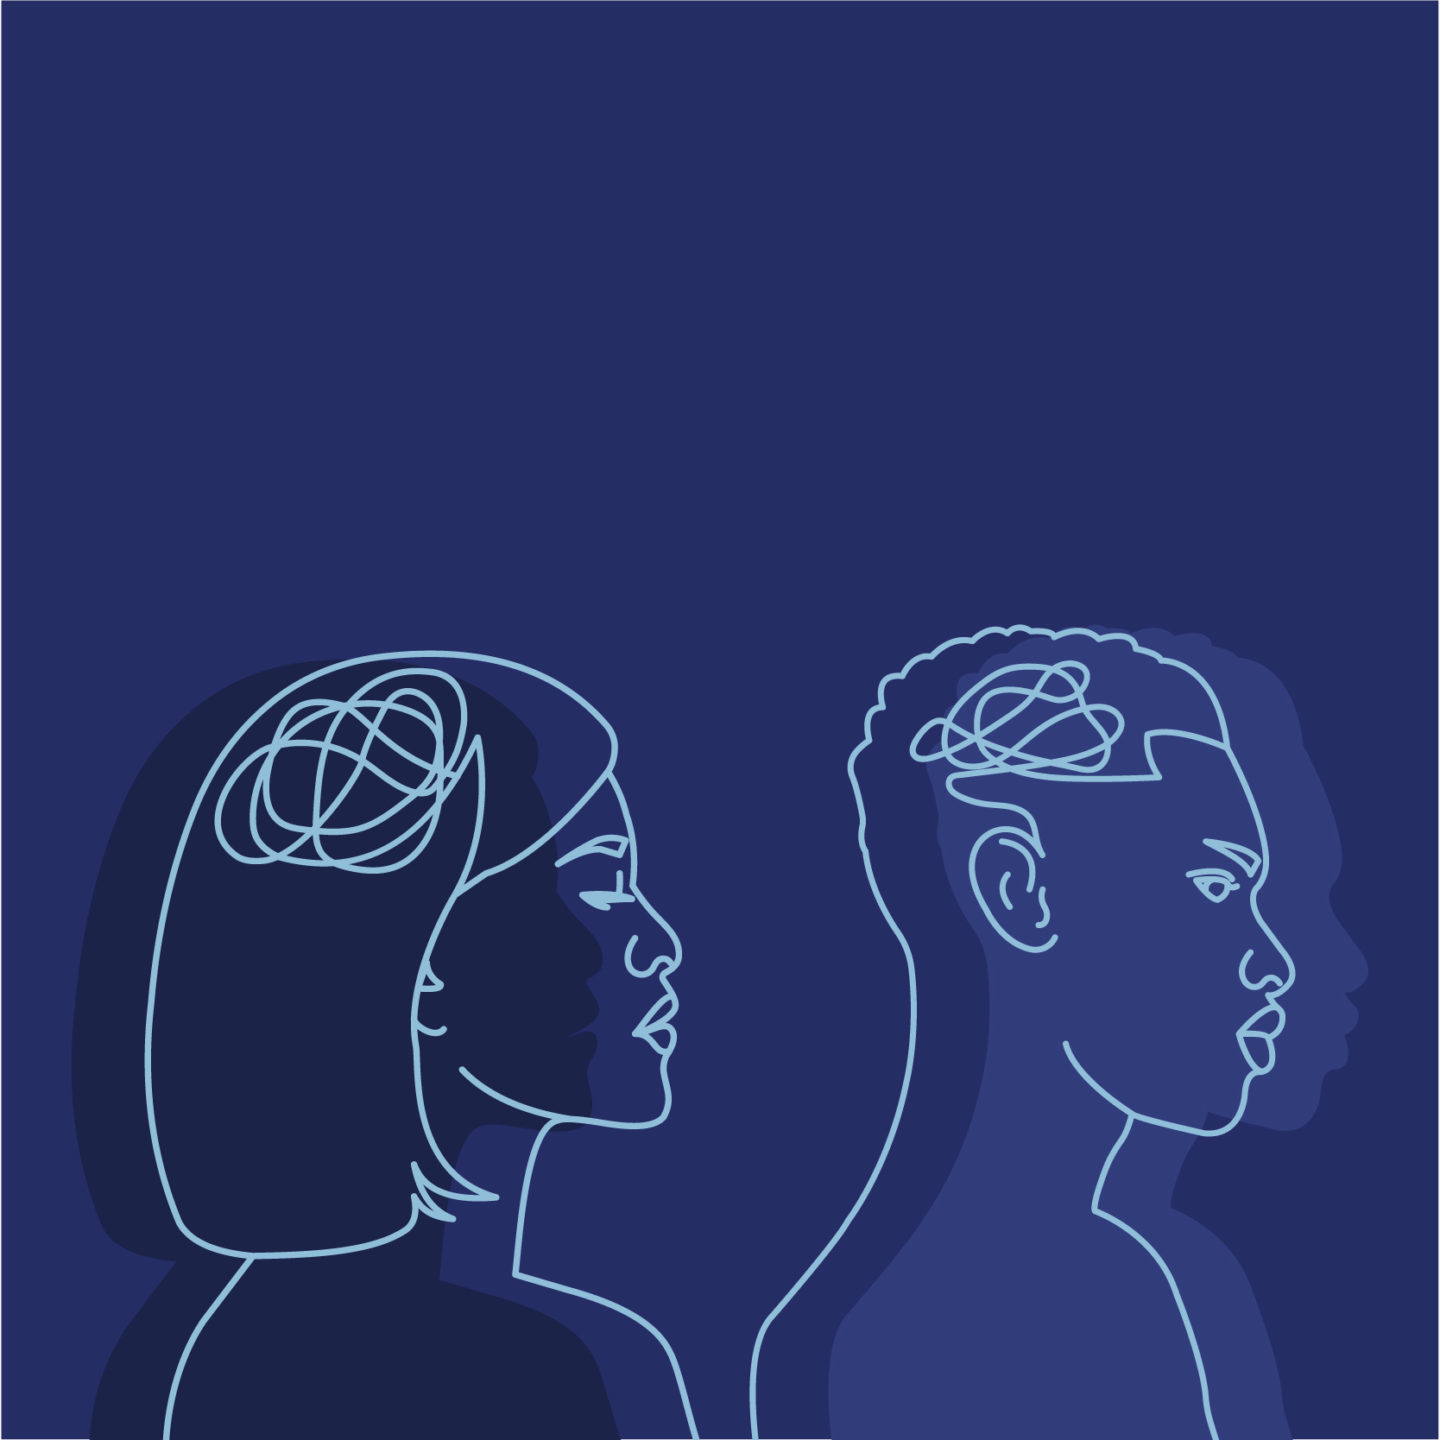 Navy blue outlined side profile illustration of an Asian woman and Black man.